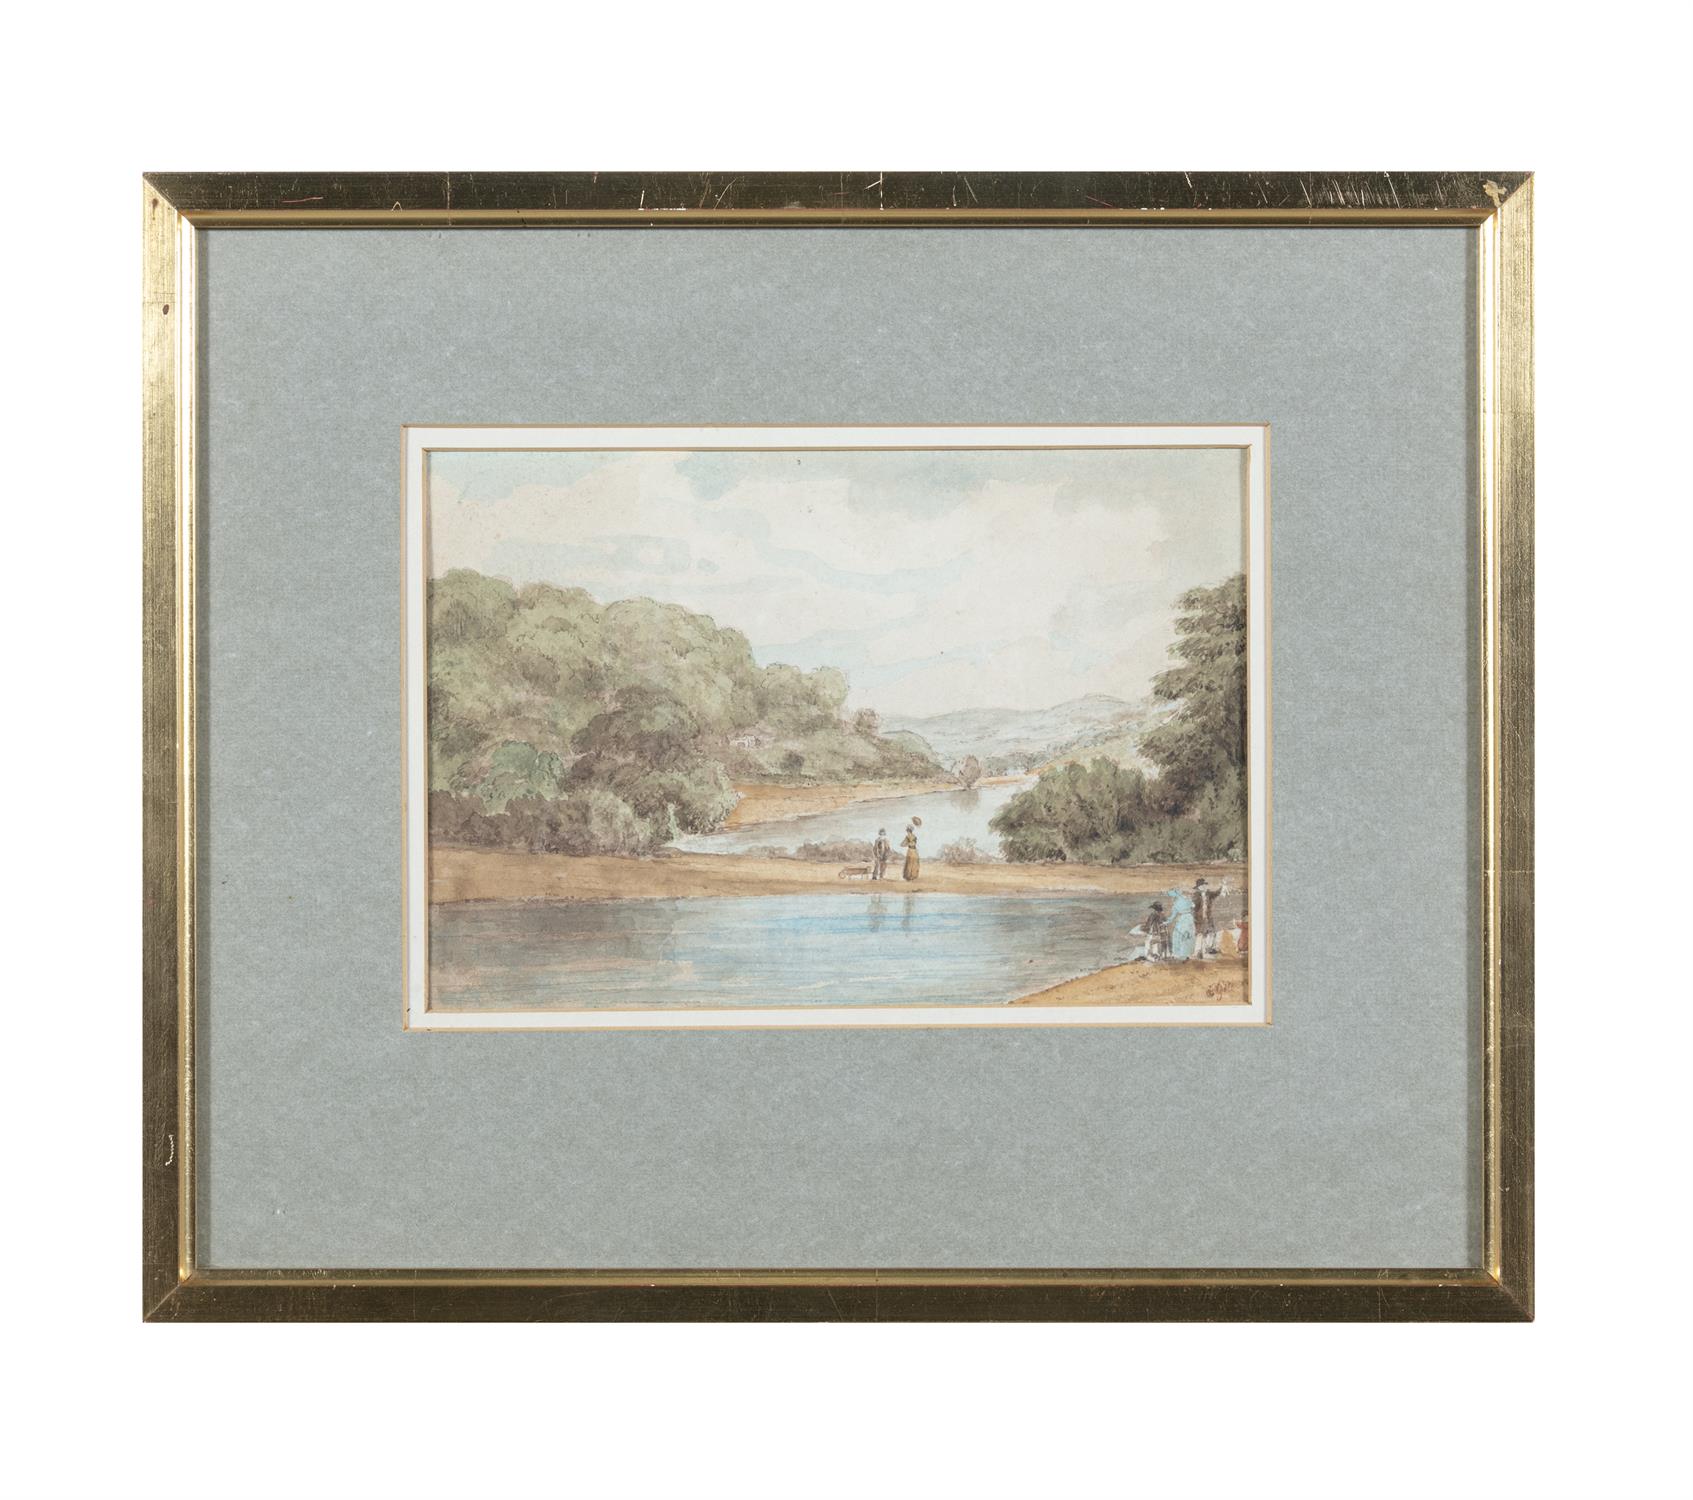 VICTORIAN SCHOOL Figures in a River Landscape Watercolour, 16.5 x 24.5cm Indistinctly signed